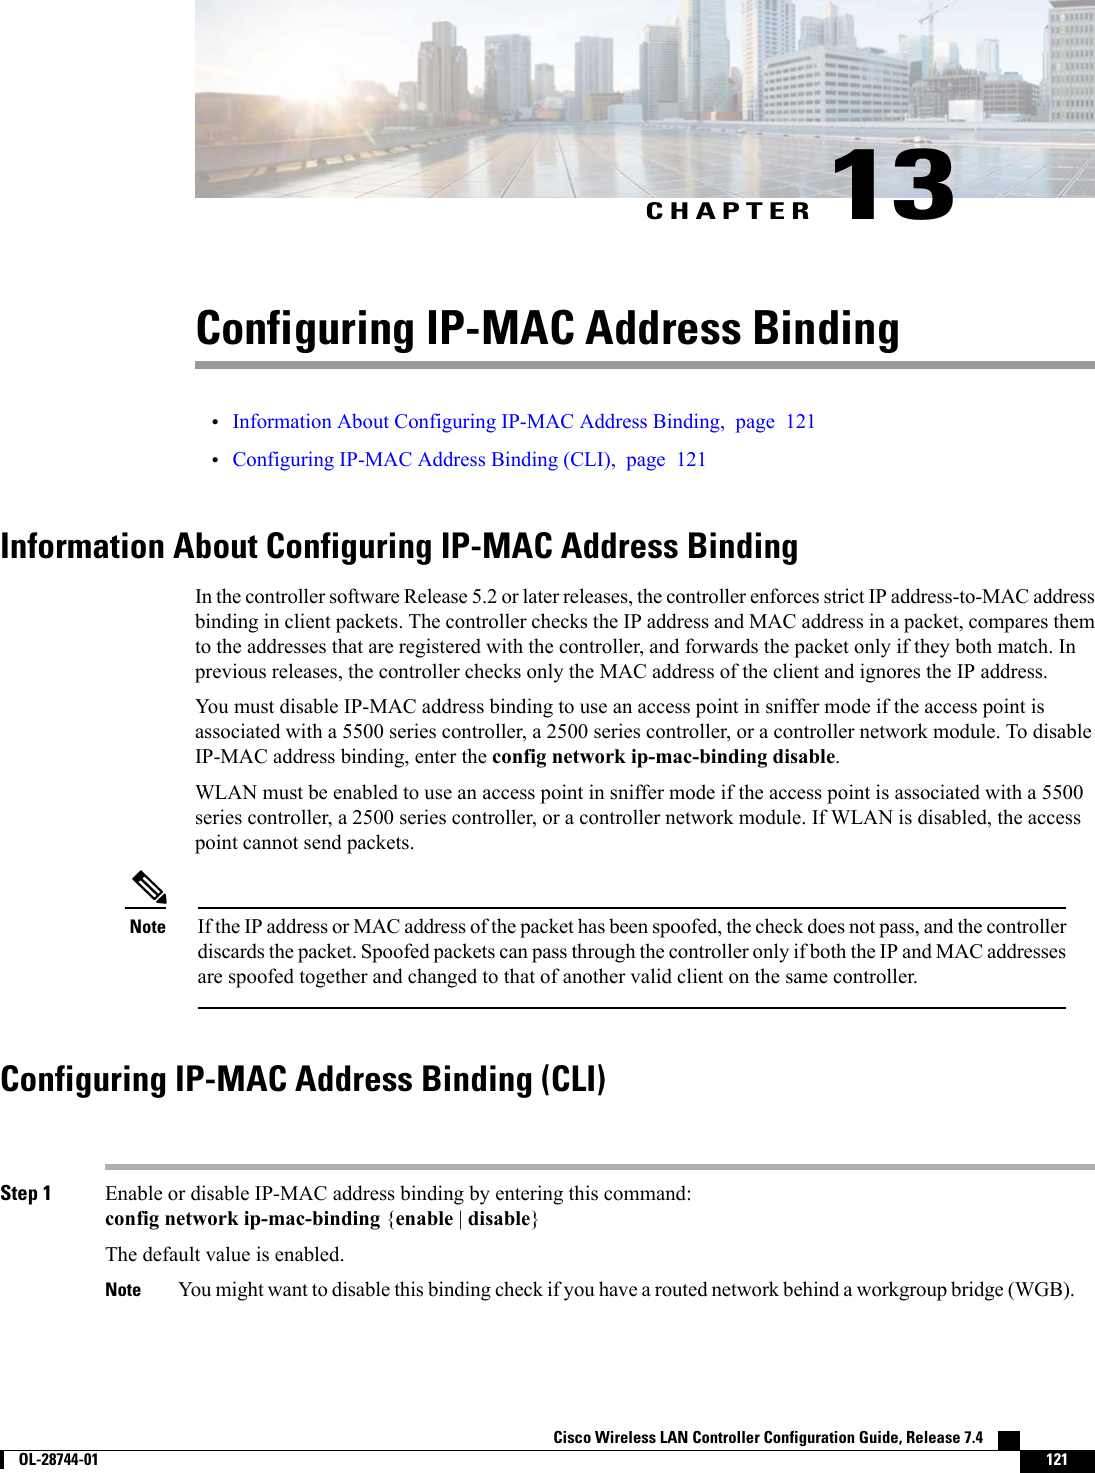 CHAPTER 13Configuring IP-MAC Address Binding•Information About Configuring IP-MAC Address Binding, page 121•Configuring IP-MAC Address Binding (CLI), page 121Information About Configuring IP-MAC Address BindingIn the controller software Release 5.2 or later releases, the controller enforces strict IP address-to-MAC addressbinding in client packets. The controller checks the IP address and MAC address in a packet, compares themto the addresses that are registered with the controller, and forwards the packet only if they both match. Inprevious releases, the controller checks only the MAC address of the client and ignores the IP address.You must disable IP-MAC address binding to use an access point in sniffer mode if the access point isassociated with a 5500 series controller, a 2500 series controller, or a controller network module. To disableIP-MAC address binding, enter the config network ip-mac-binding disable.WLAN must be enabled to use an access point in sniffer mode if the access point is associated with a 5500series controller, a 2500 series controller, or a controller network module. If WLAN is disabled, the accesspoint cannot send packets.If the IP address or MAC address of the packet has been spoofed, the check does not pass, and the controllerdiscards the packet. Spoofed packets can pass through the controller only if both the IP and MAC addressesare spoofed together and changed to that of another valid client on the same controller.NoteConfiguring IP-MAC Address Binding (CLI)Step 1 Enable or disable IP-MAC address binding by entering this command:config network ip-mac-binding {enable |disable}The default value is enabled.You might want to disable this binding check if you have a routed network behind a workgroup bridge (WGB).NoteCisco Wireless LAN Controller Configuration Guide, Release 7.4        OL-28744-01 121